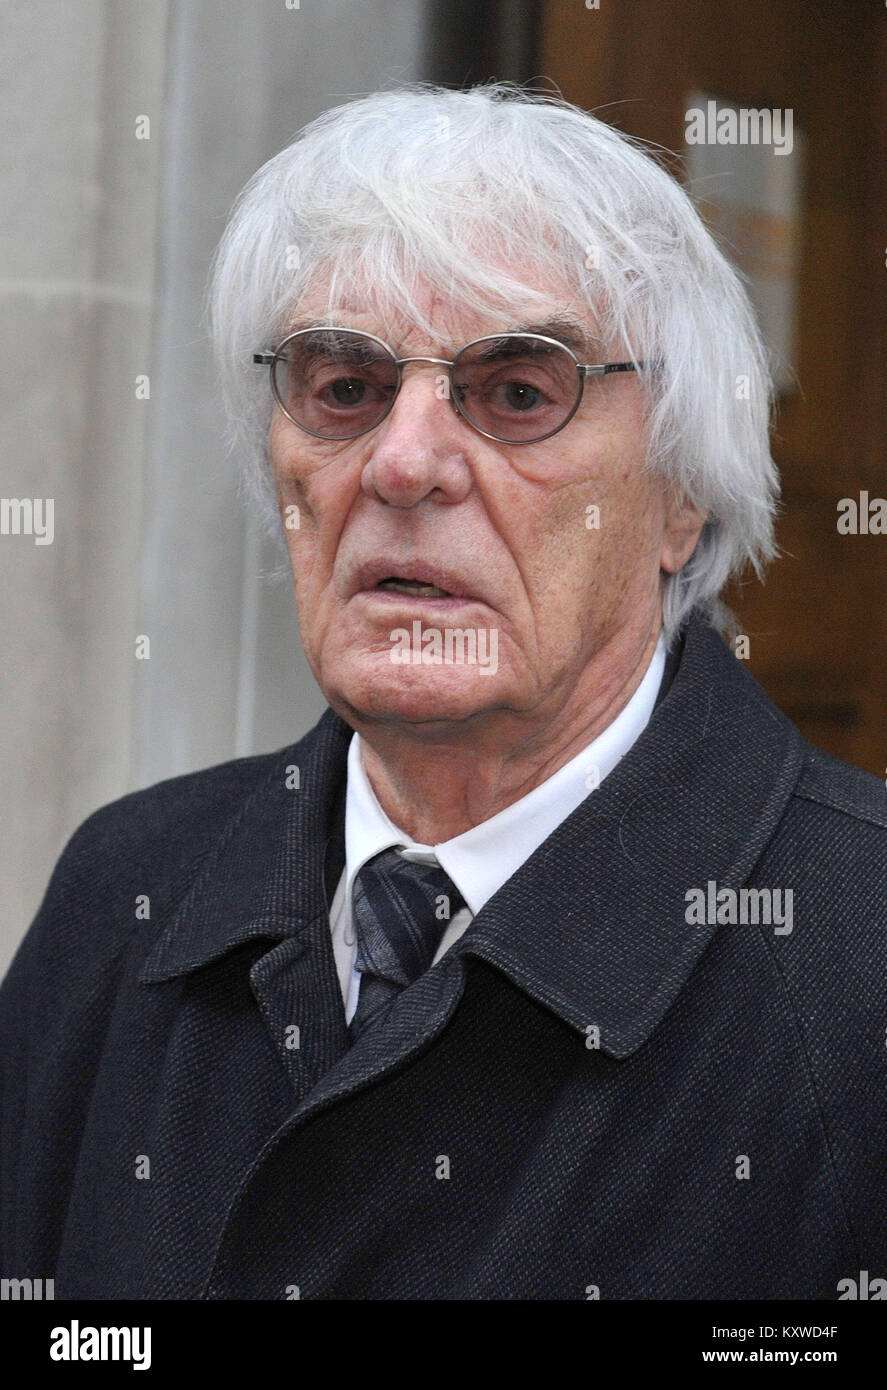 Tycoon Bernie Ecclestone leaving London's Central Family Court, where his daughter Petra Ecclestone had the latest hearing in her divorce battle with ex-husband James Stunt. Stock Photo